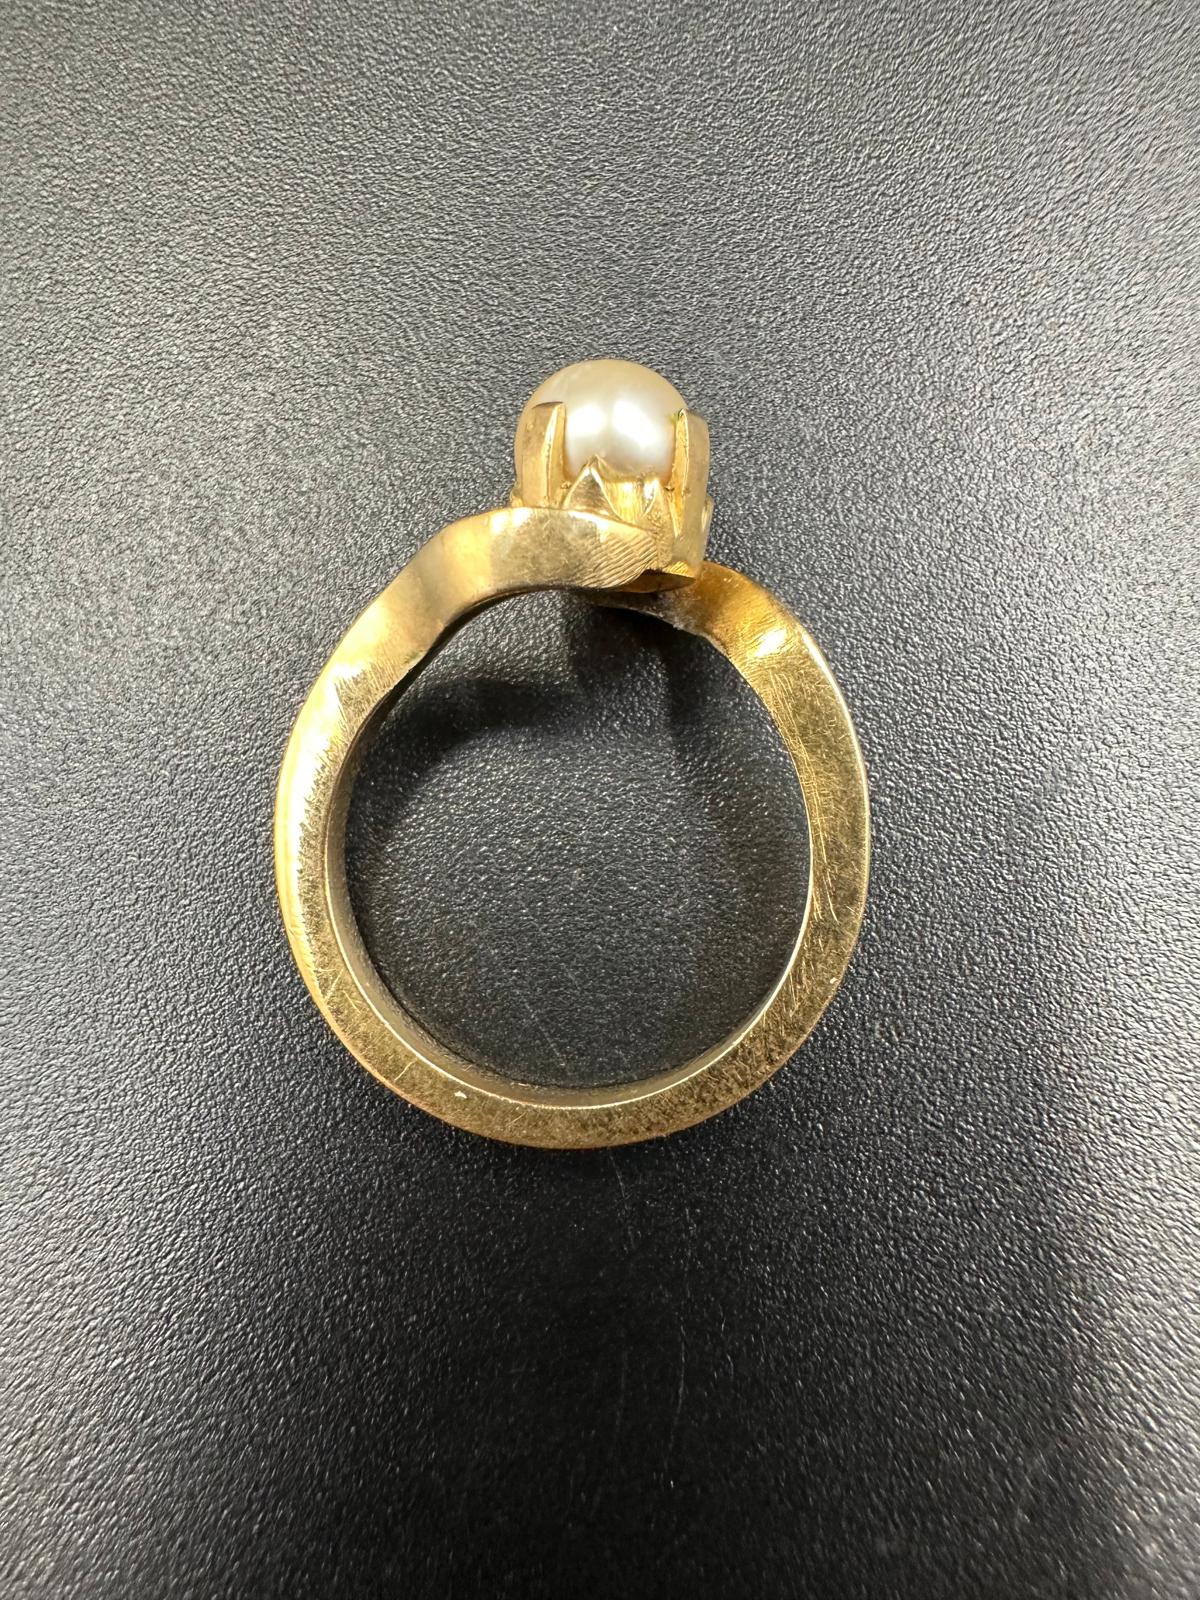 Three gold pearl rings with an approximate total weight of 11g. - Image 3 of 4